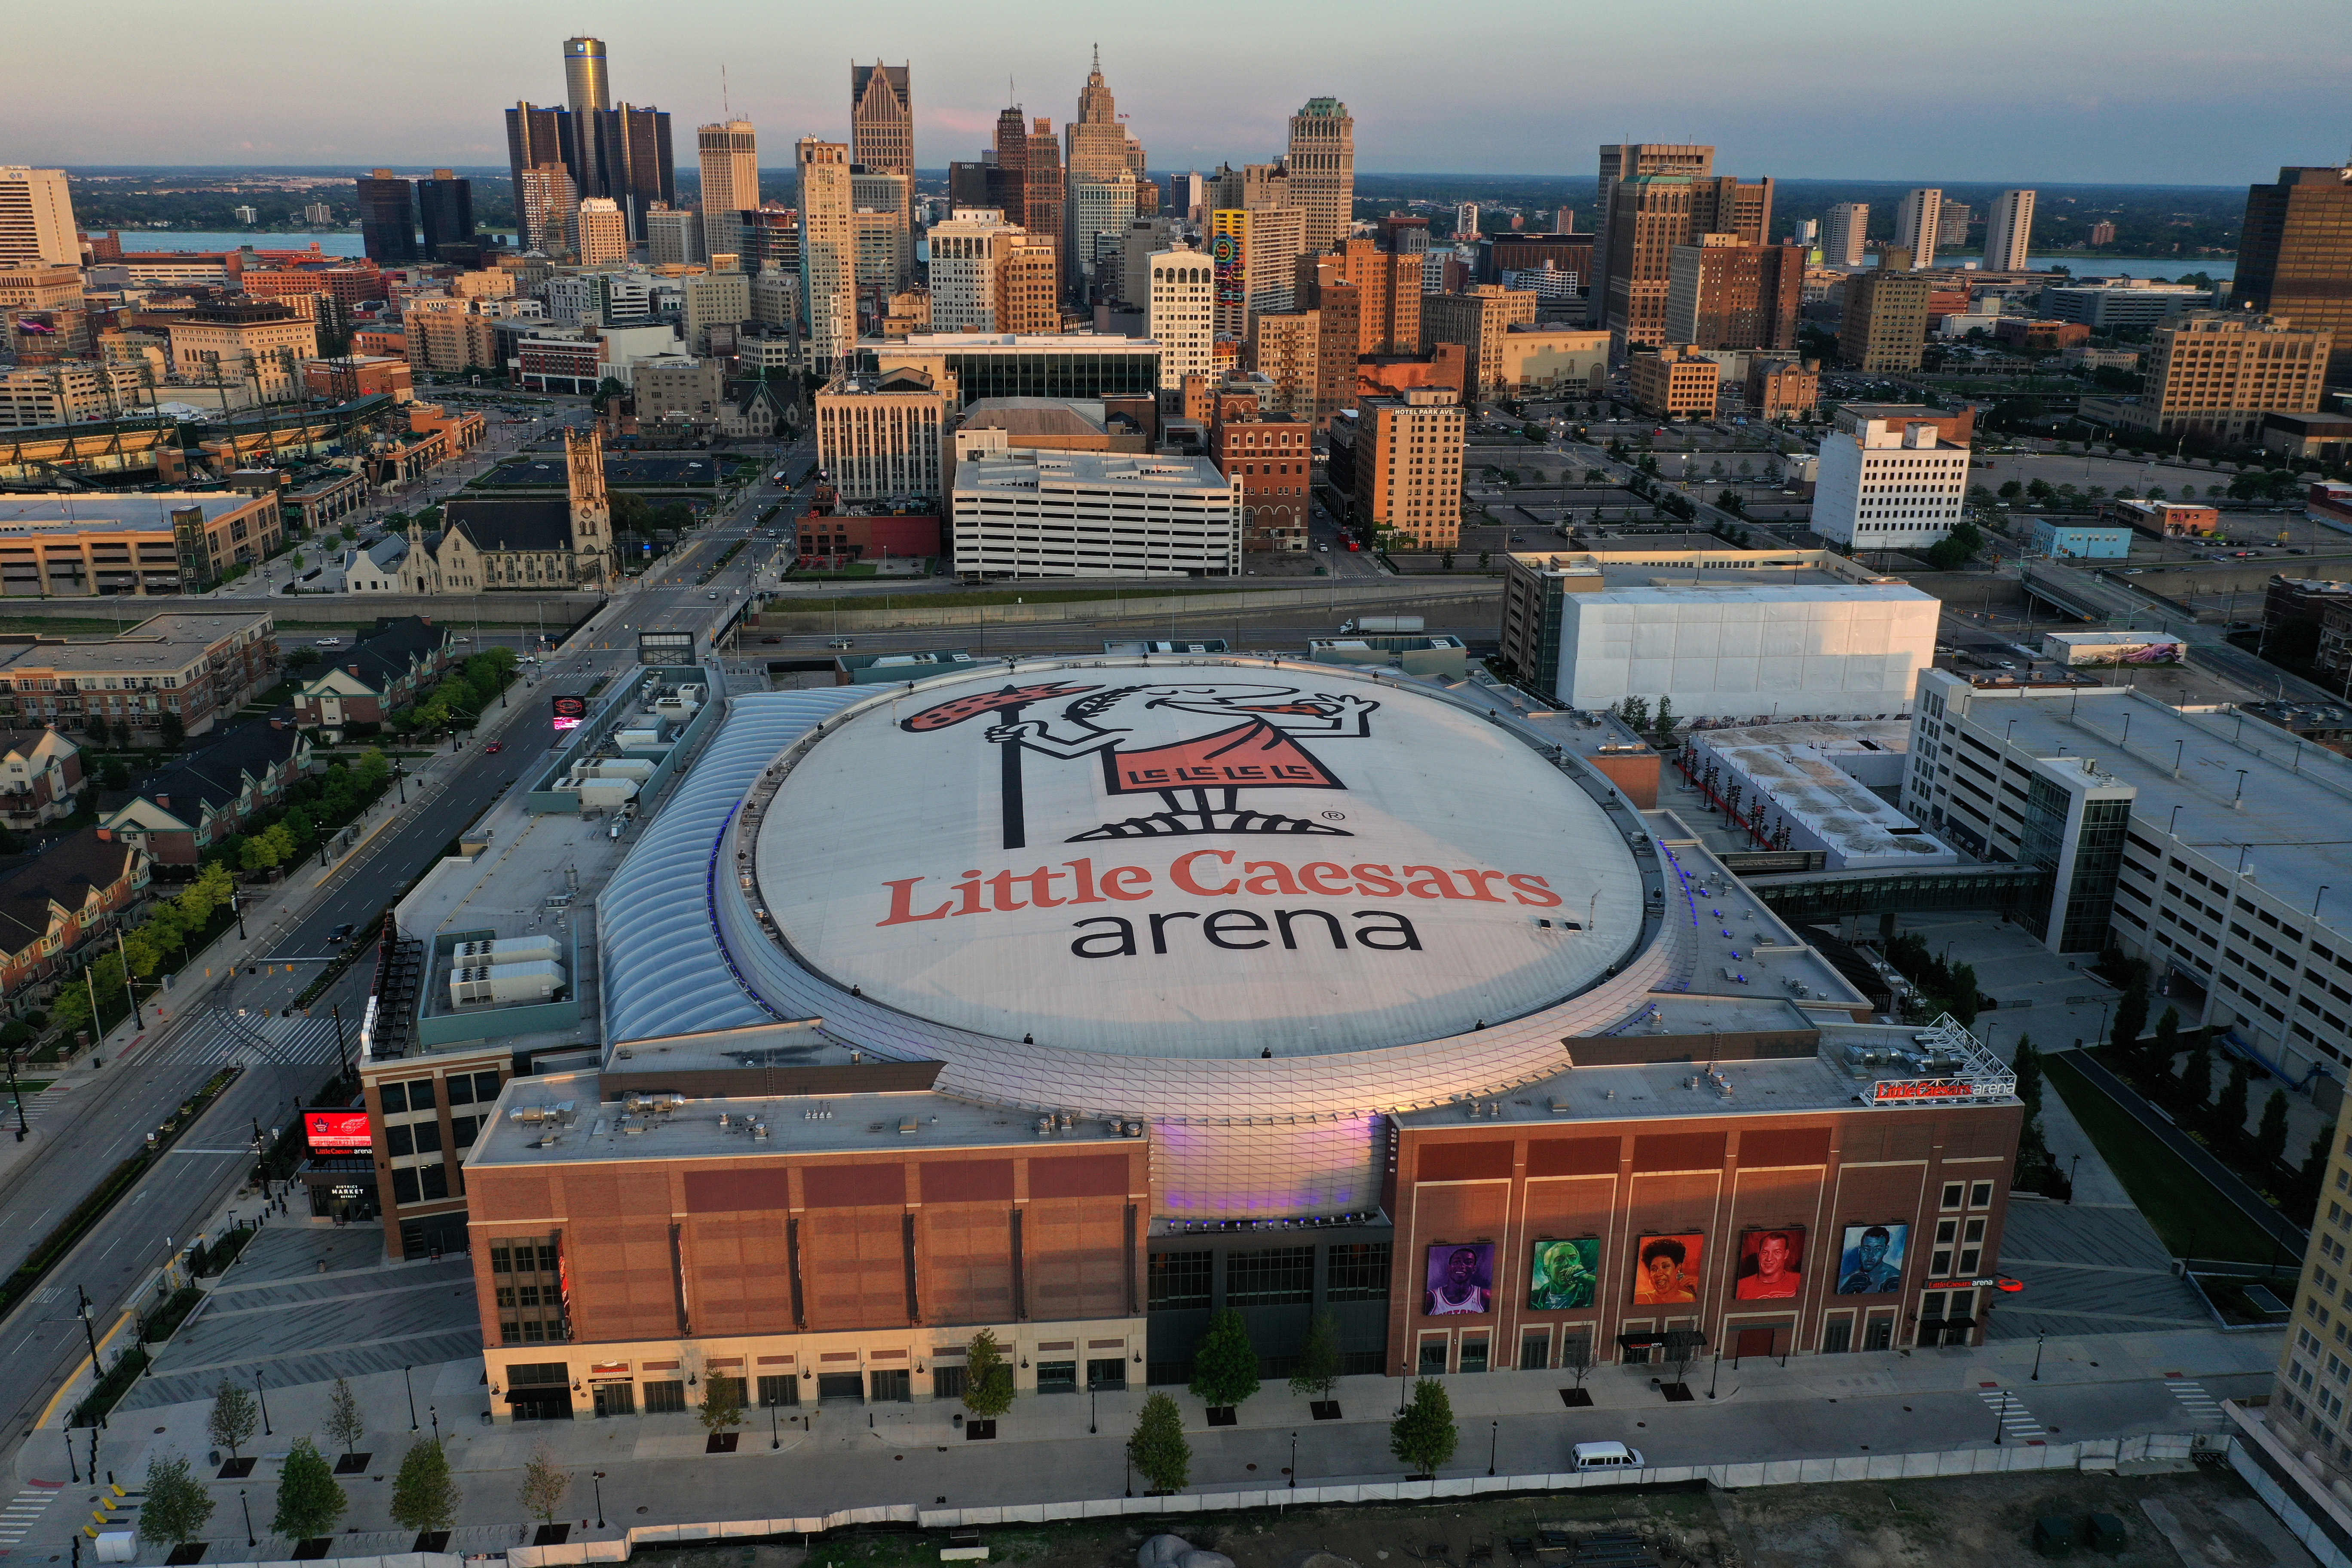 Aerial view of a huge arena with Little Caesars Arena on the dome. Many tall buildings are nearby.